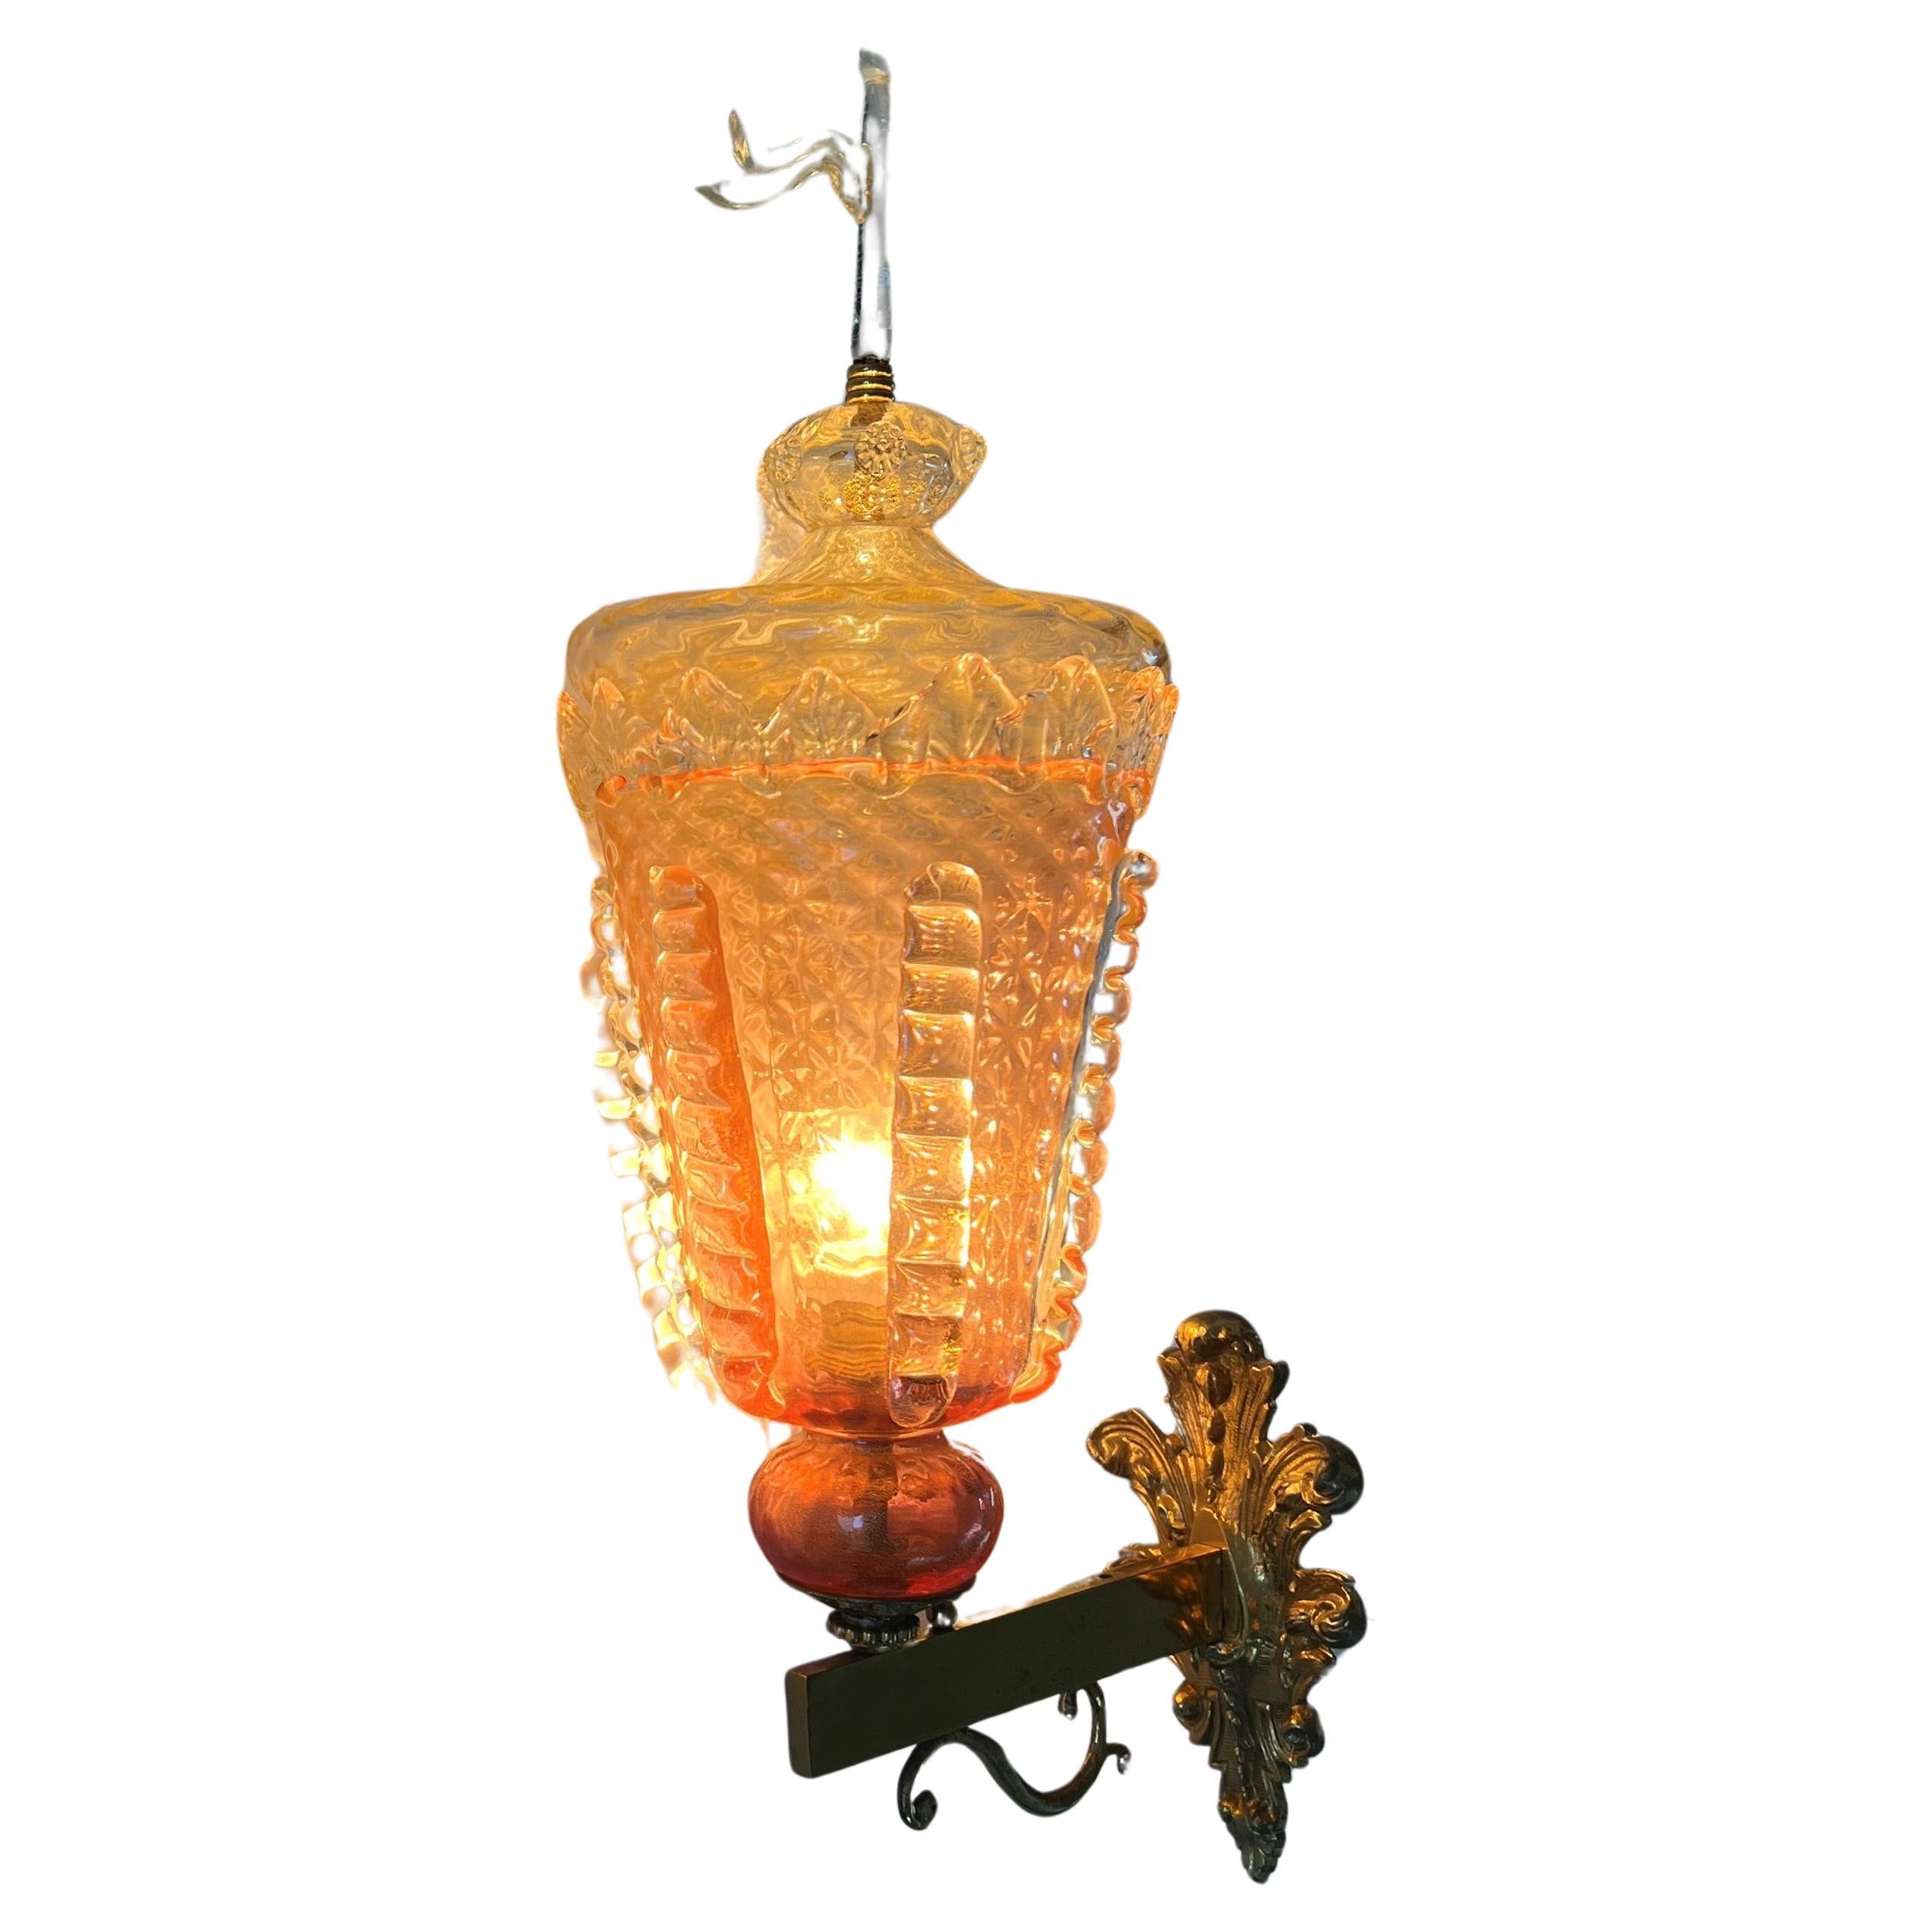 1930s Venetian Lantern Wall light, Manufactured in Murano Glass, Barovier attr. For Sale